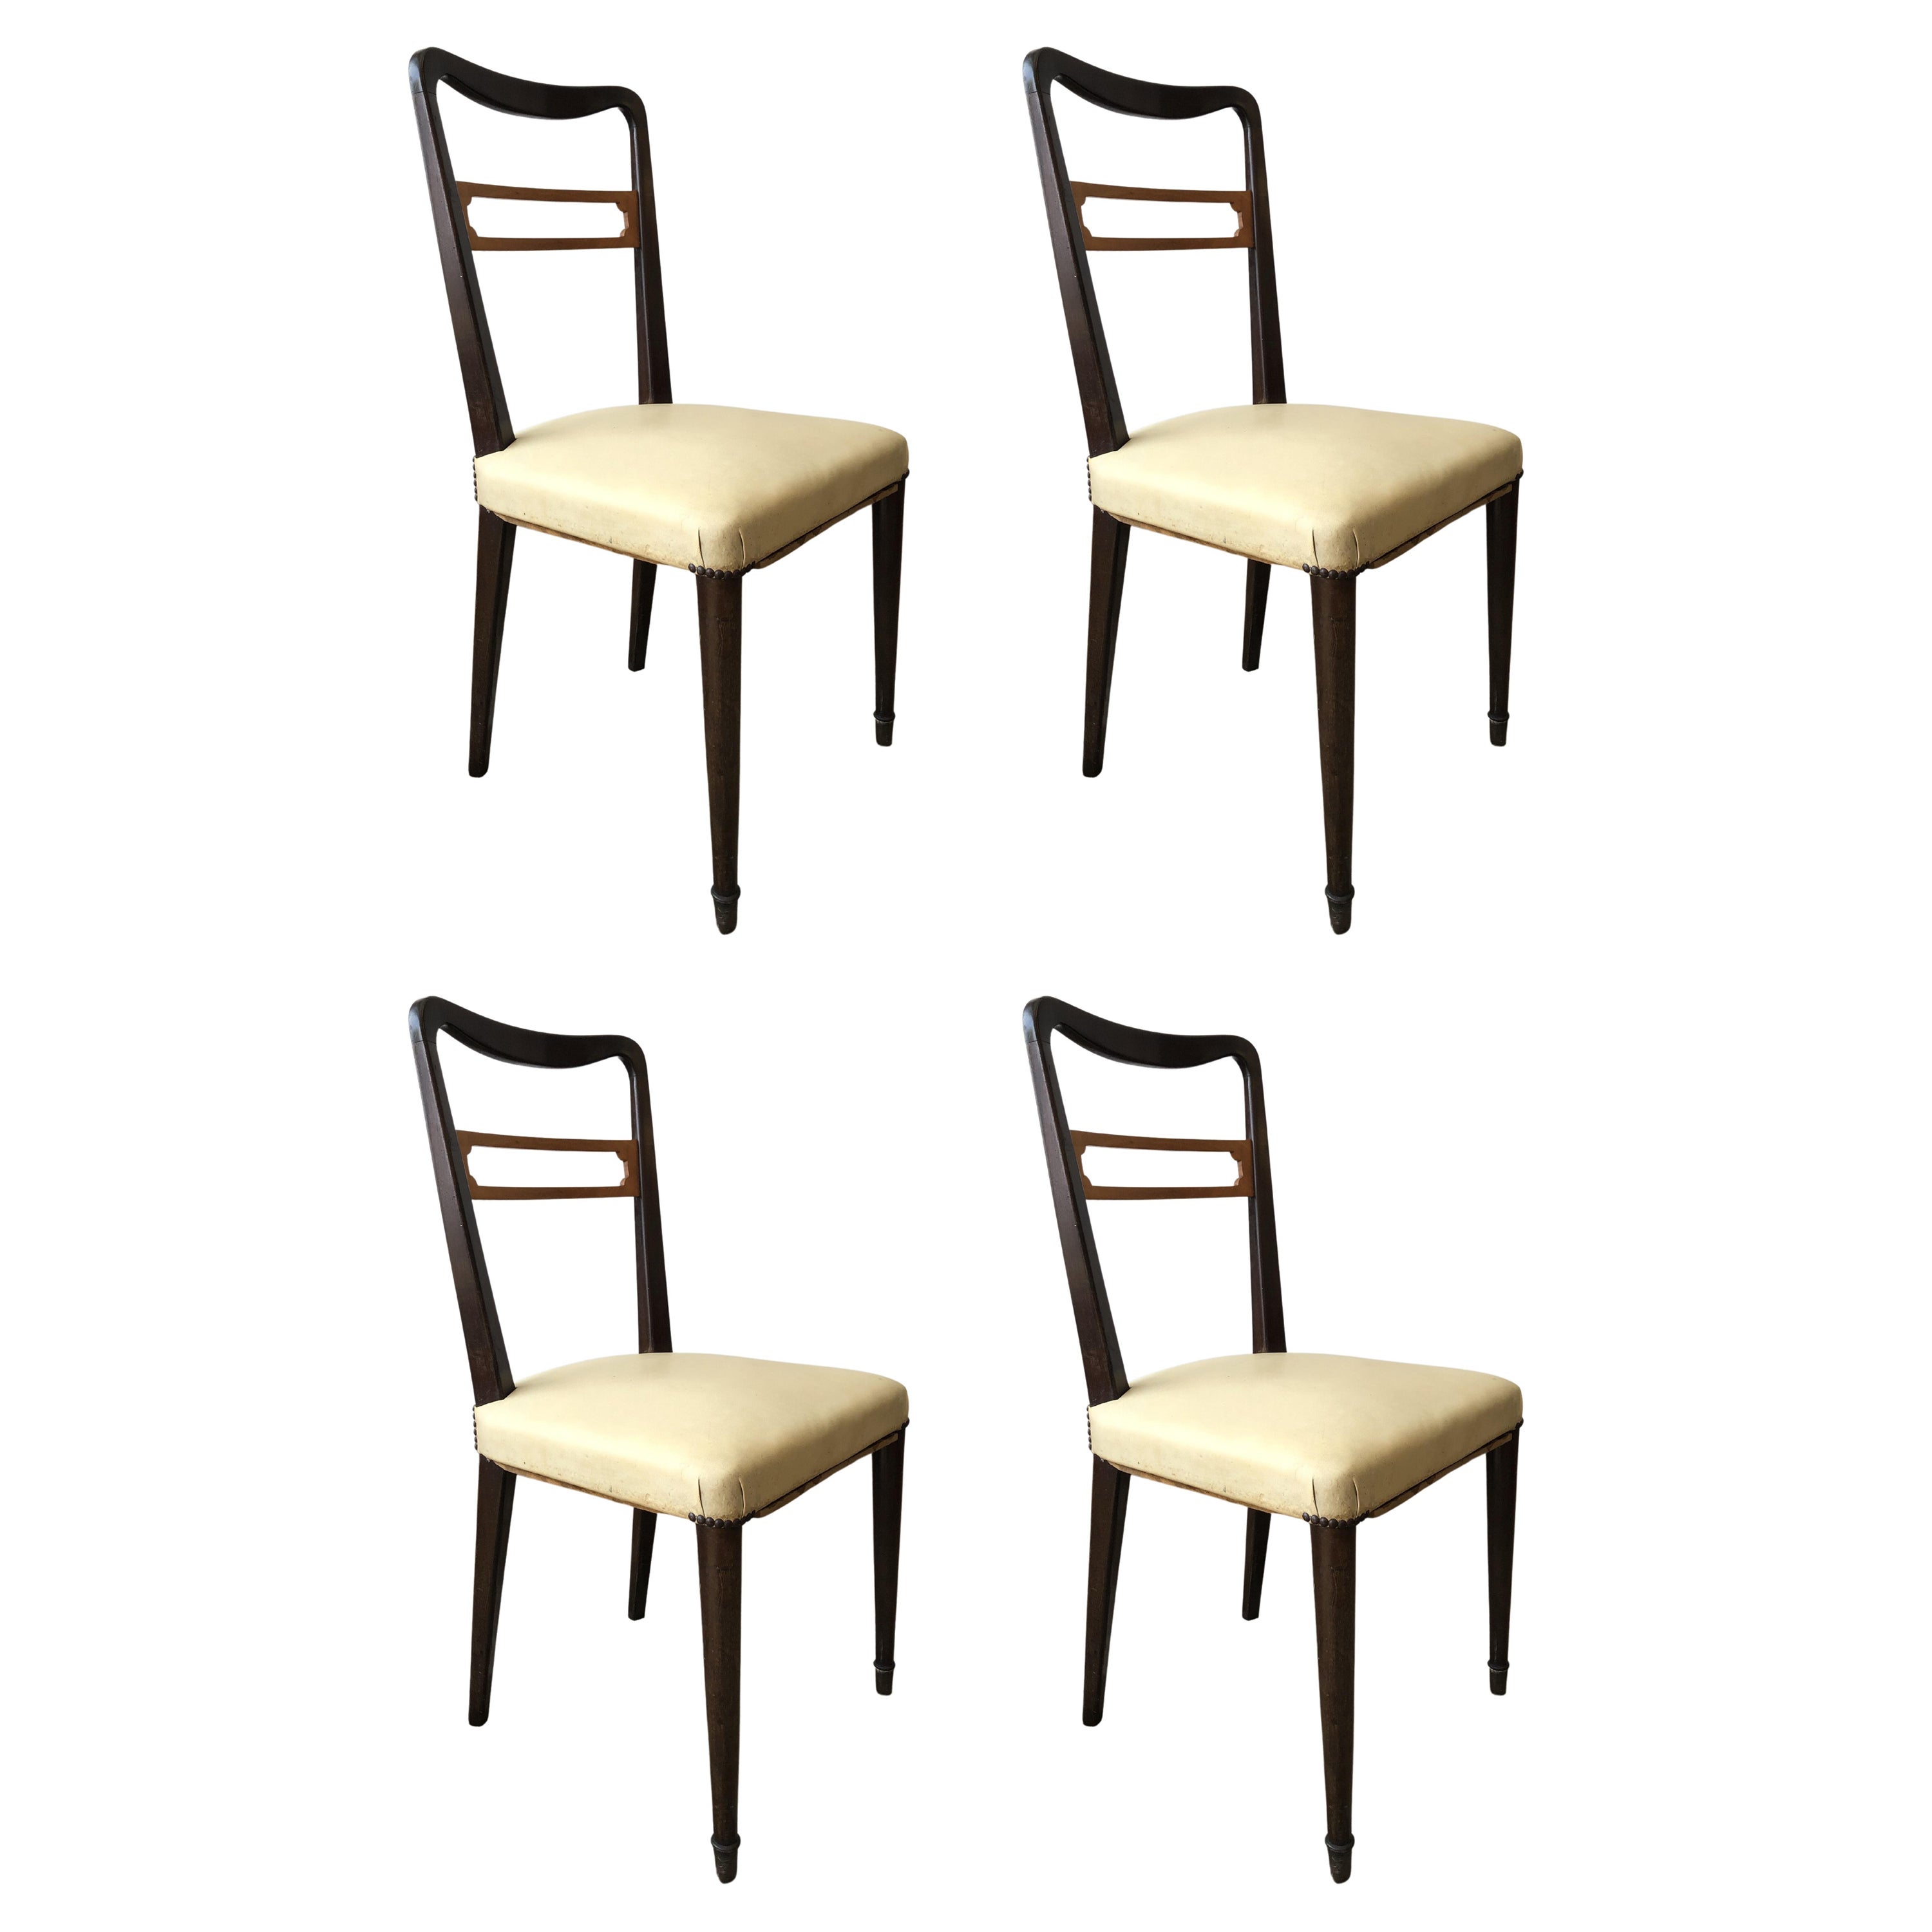 Mid-Century Modern Brazilian Light Yellow Chairs in Solid Wood, Set of 4 For Sale